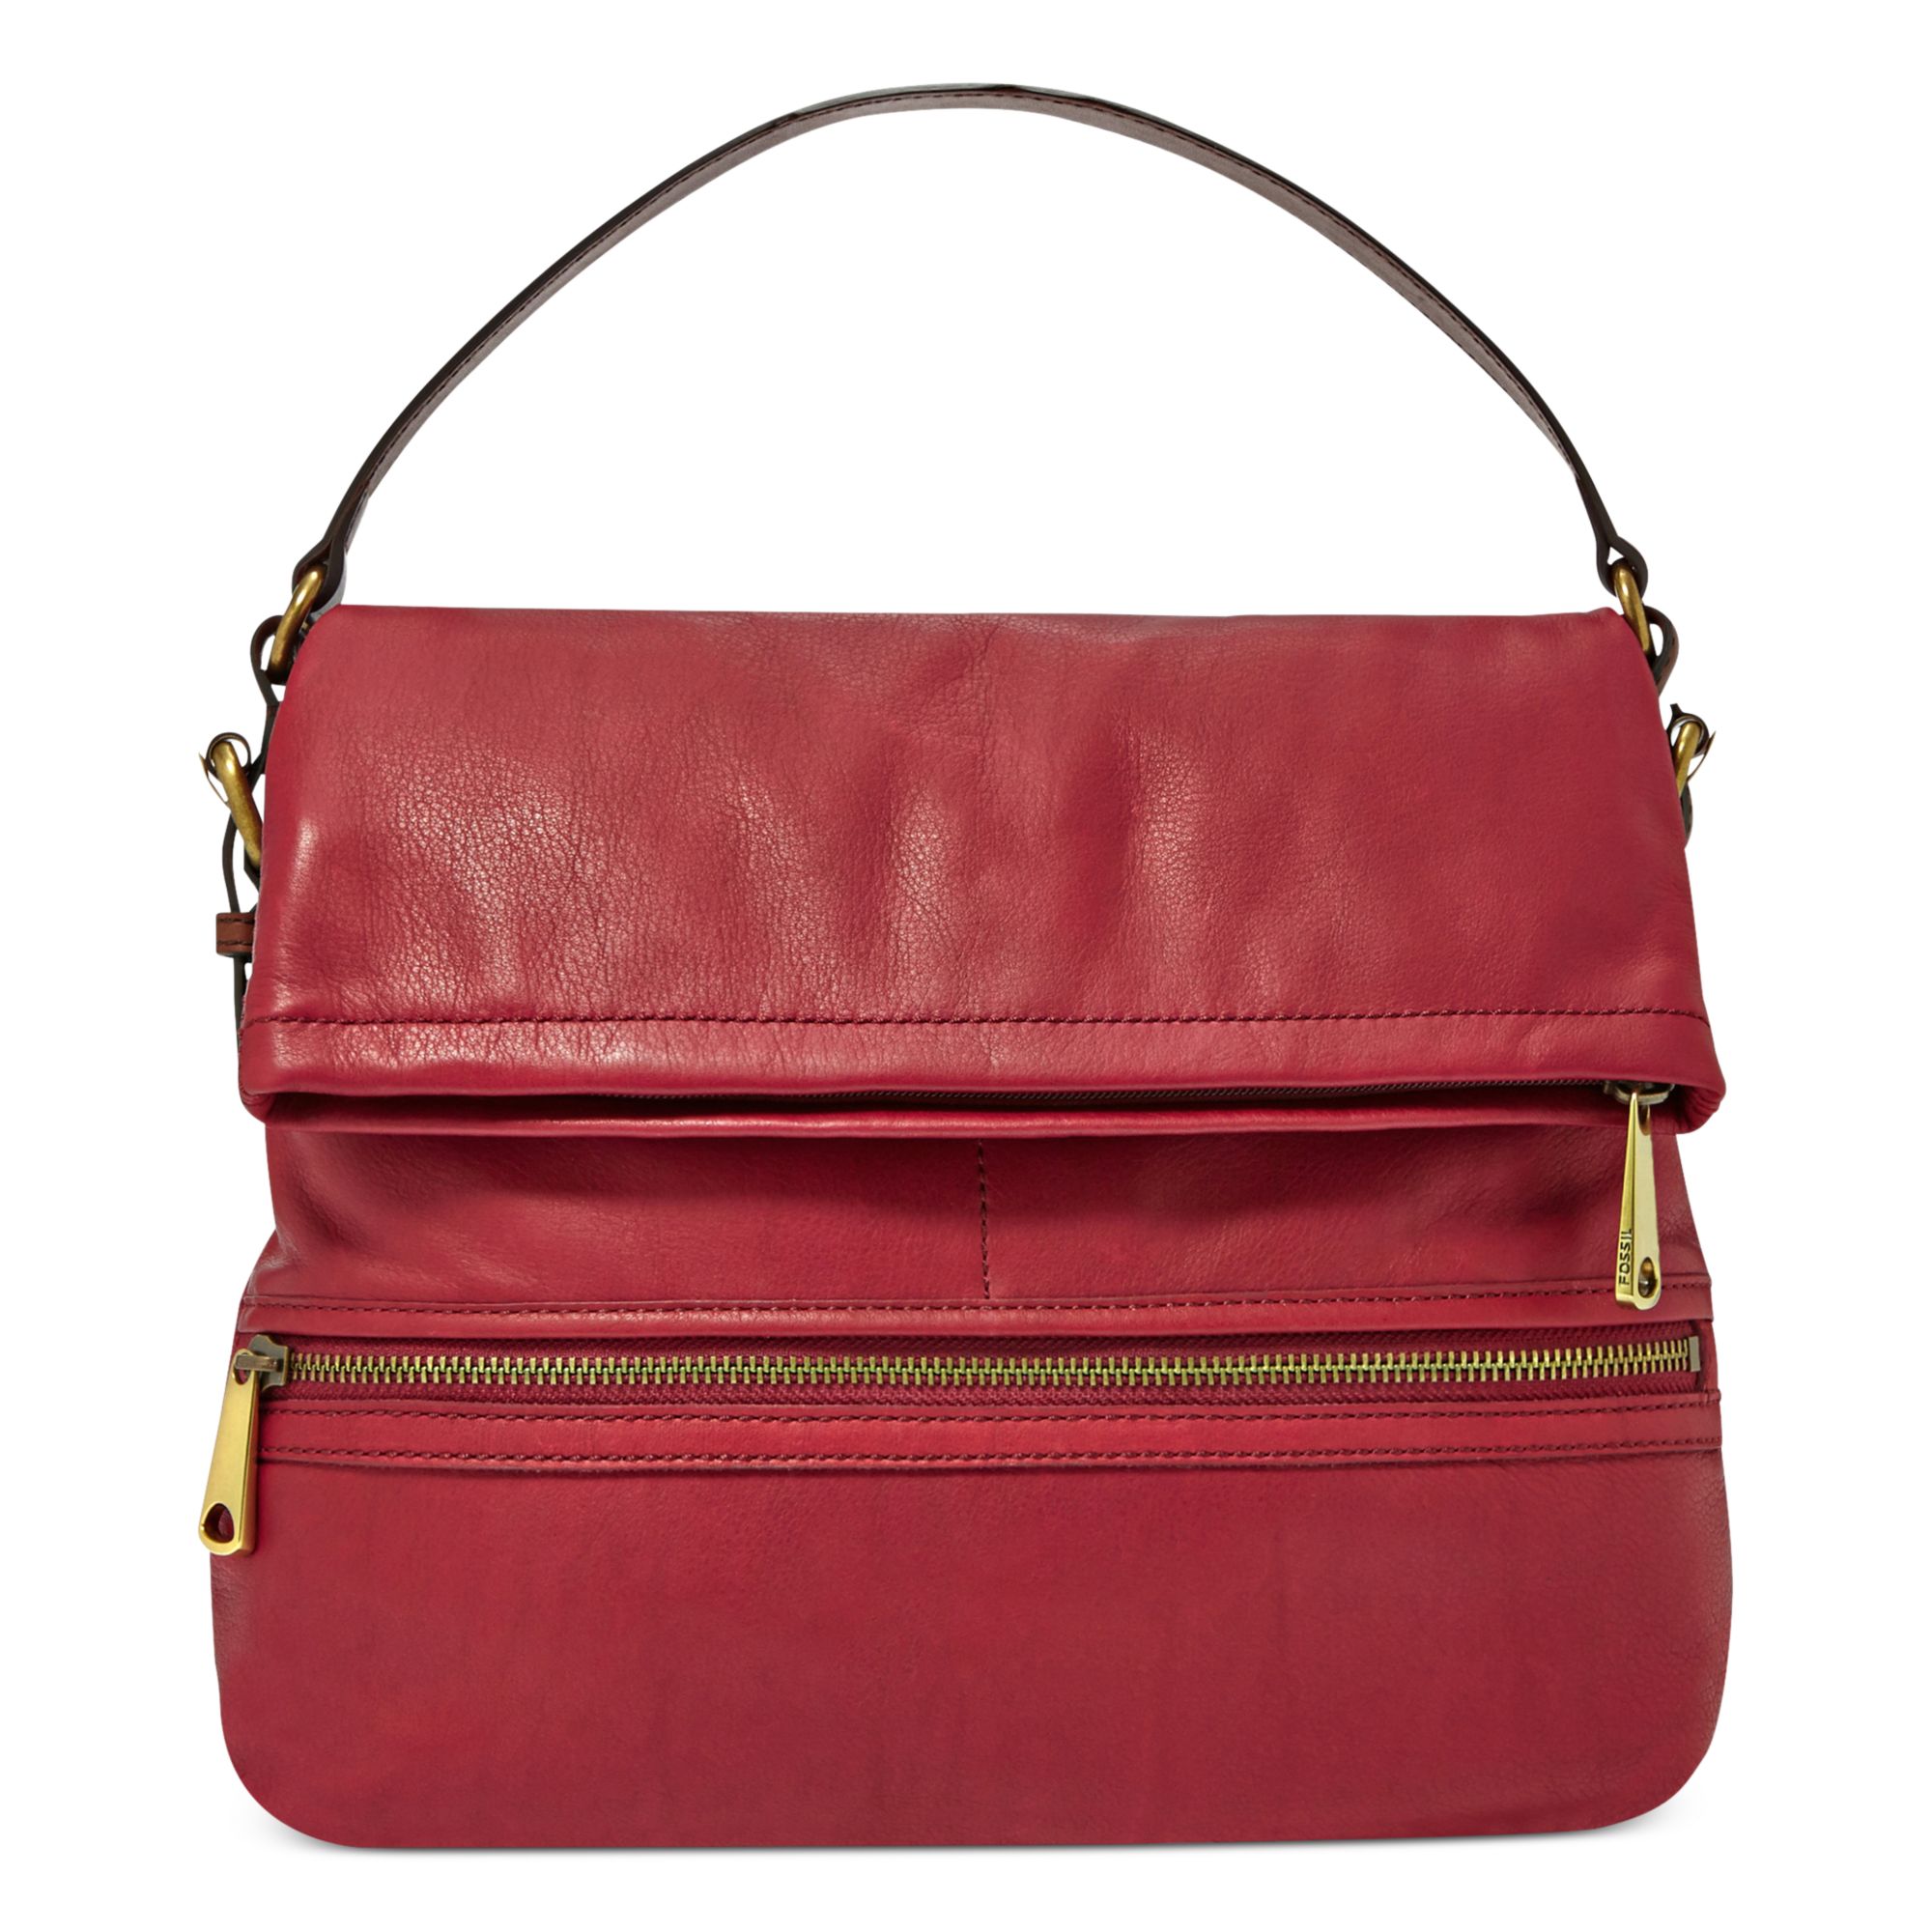 Fossil Explorer Leather Flap Bag in Purple (CRANBERRY) | Lyst